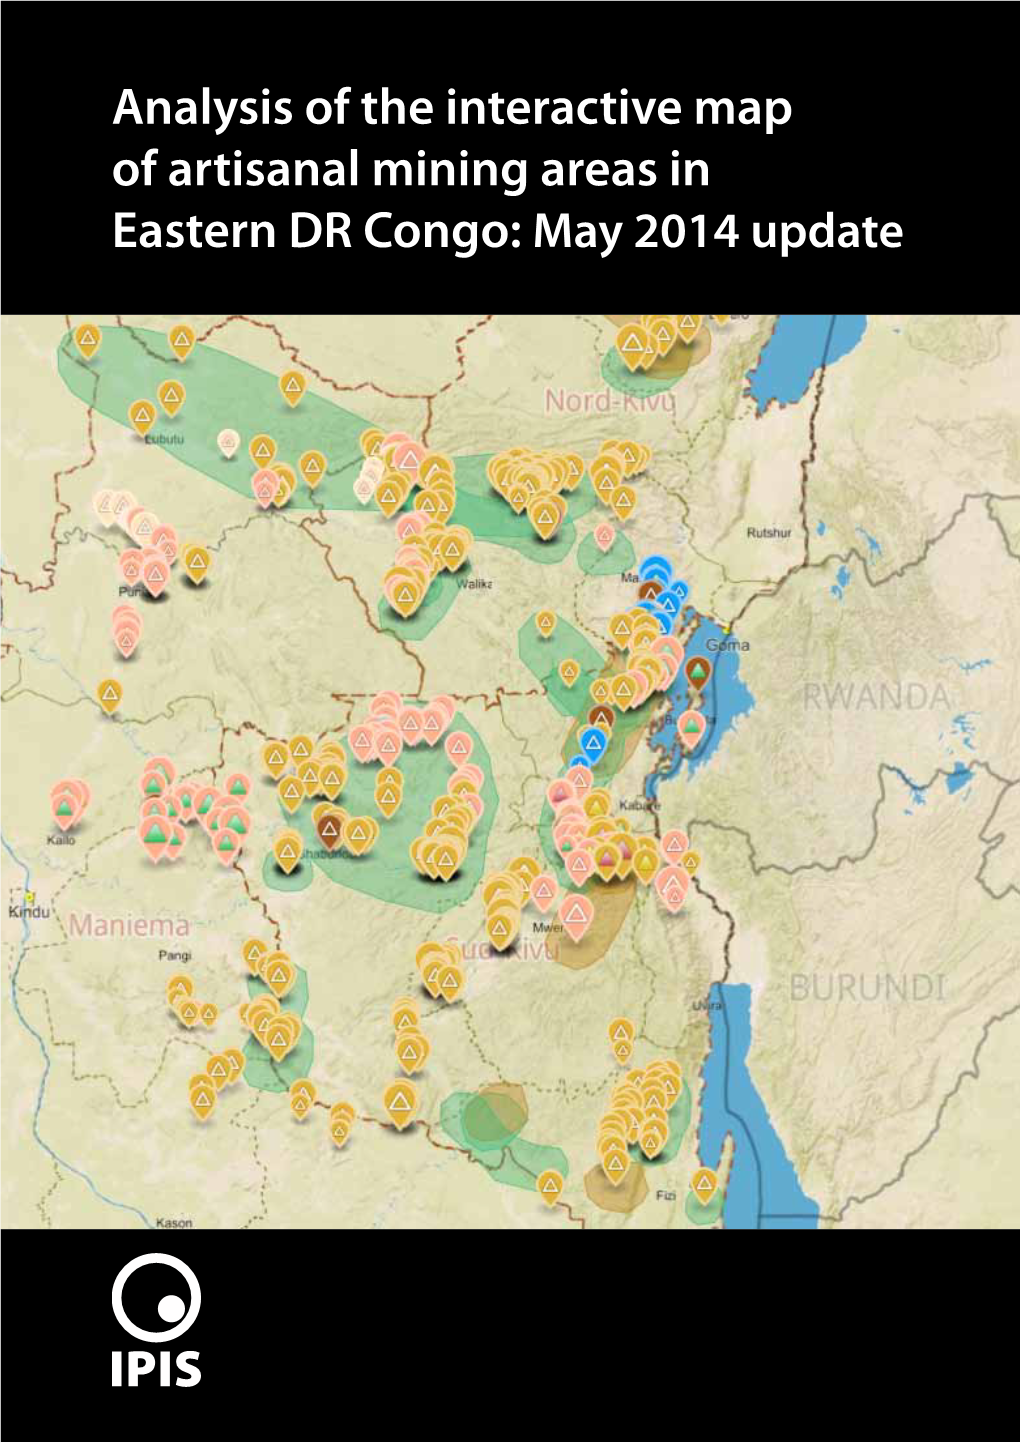 Analysis of the Interactive Map of Artisanal Mining Areas in Eastern DR Congo: May 2014 Update